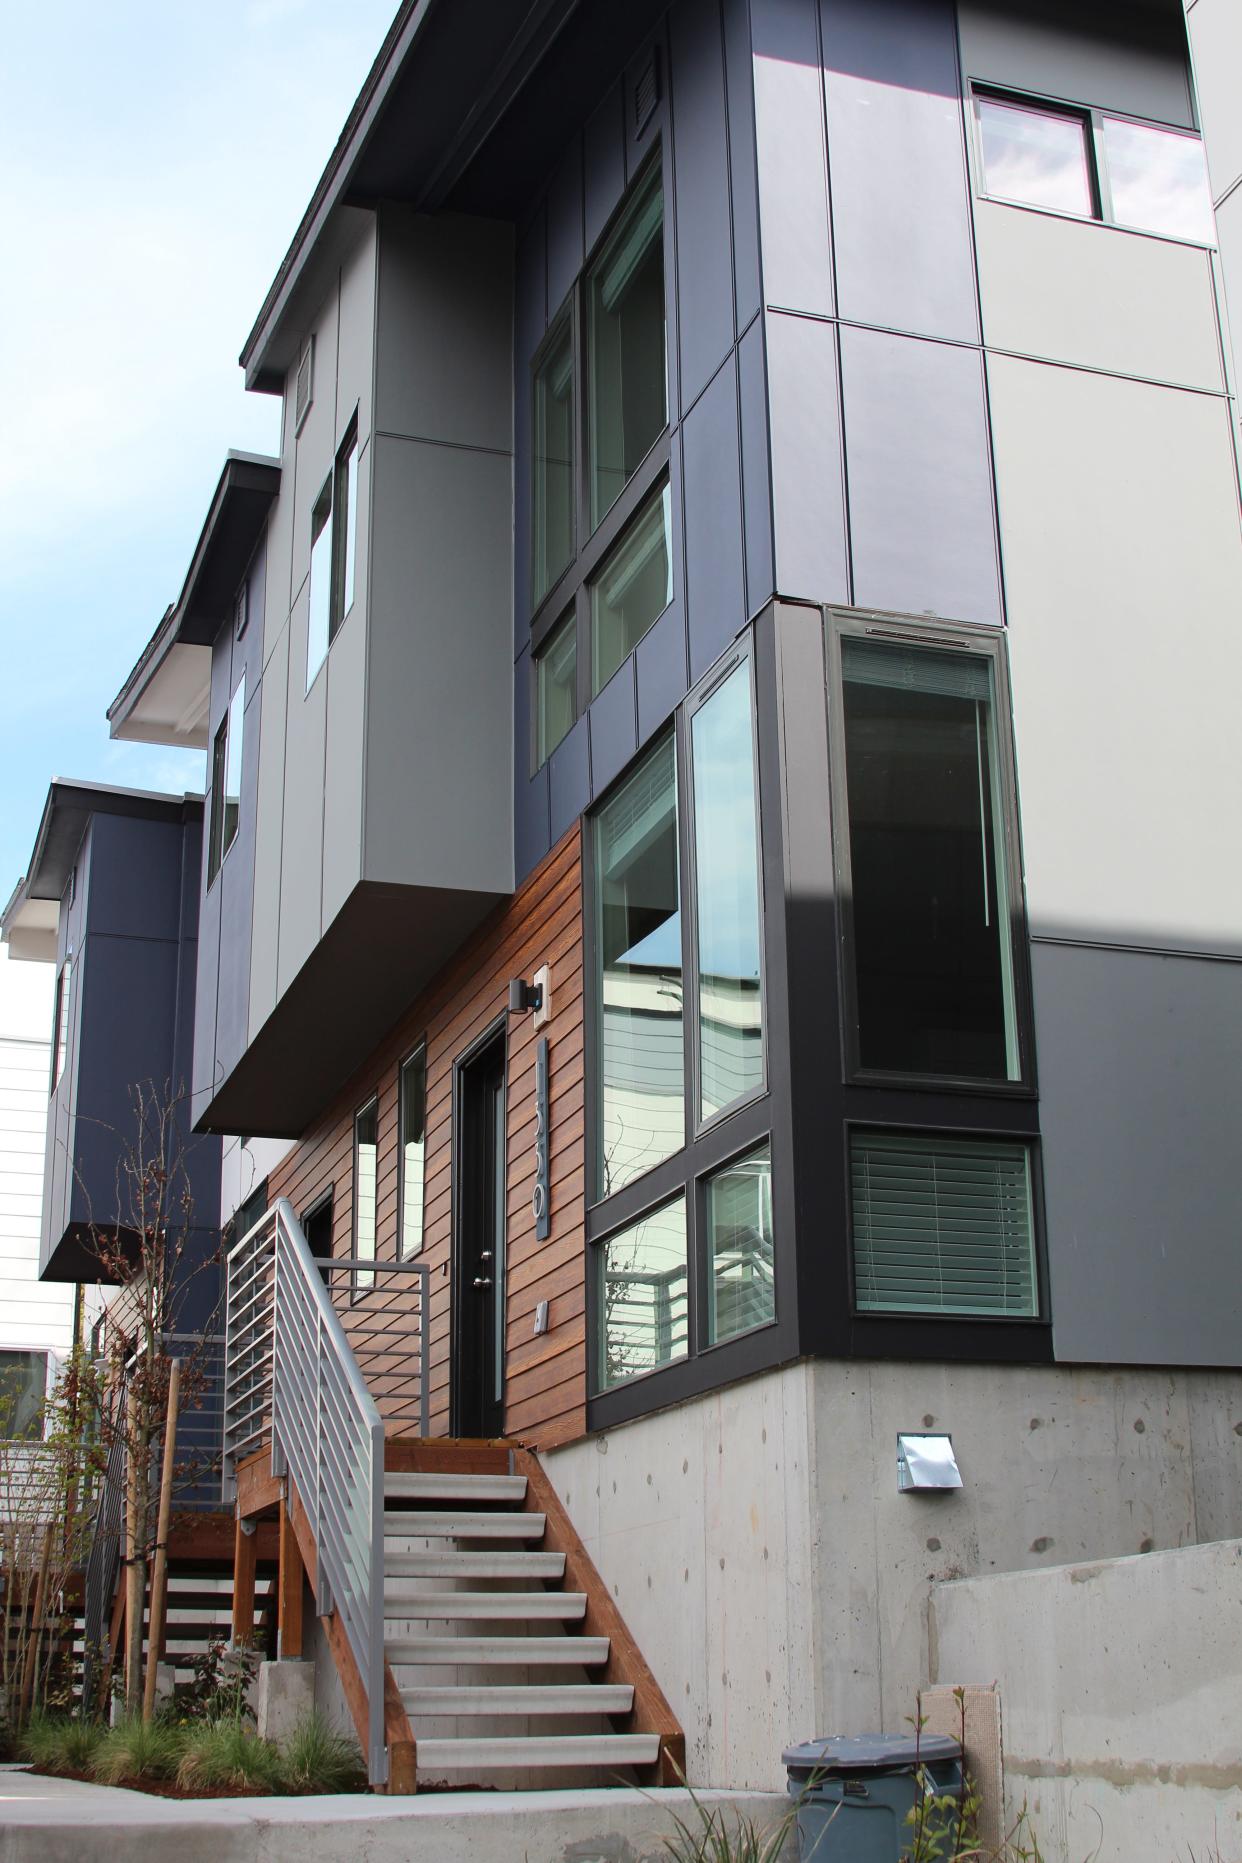 A modern-looking townhouse in Seattle's Central District neighborhood built by Homestead Community Land Trust will soon be the home to a first-time homeowner that's had problems buying an affordable home.